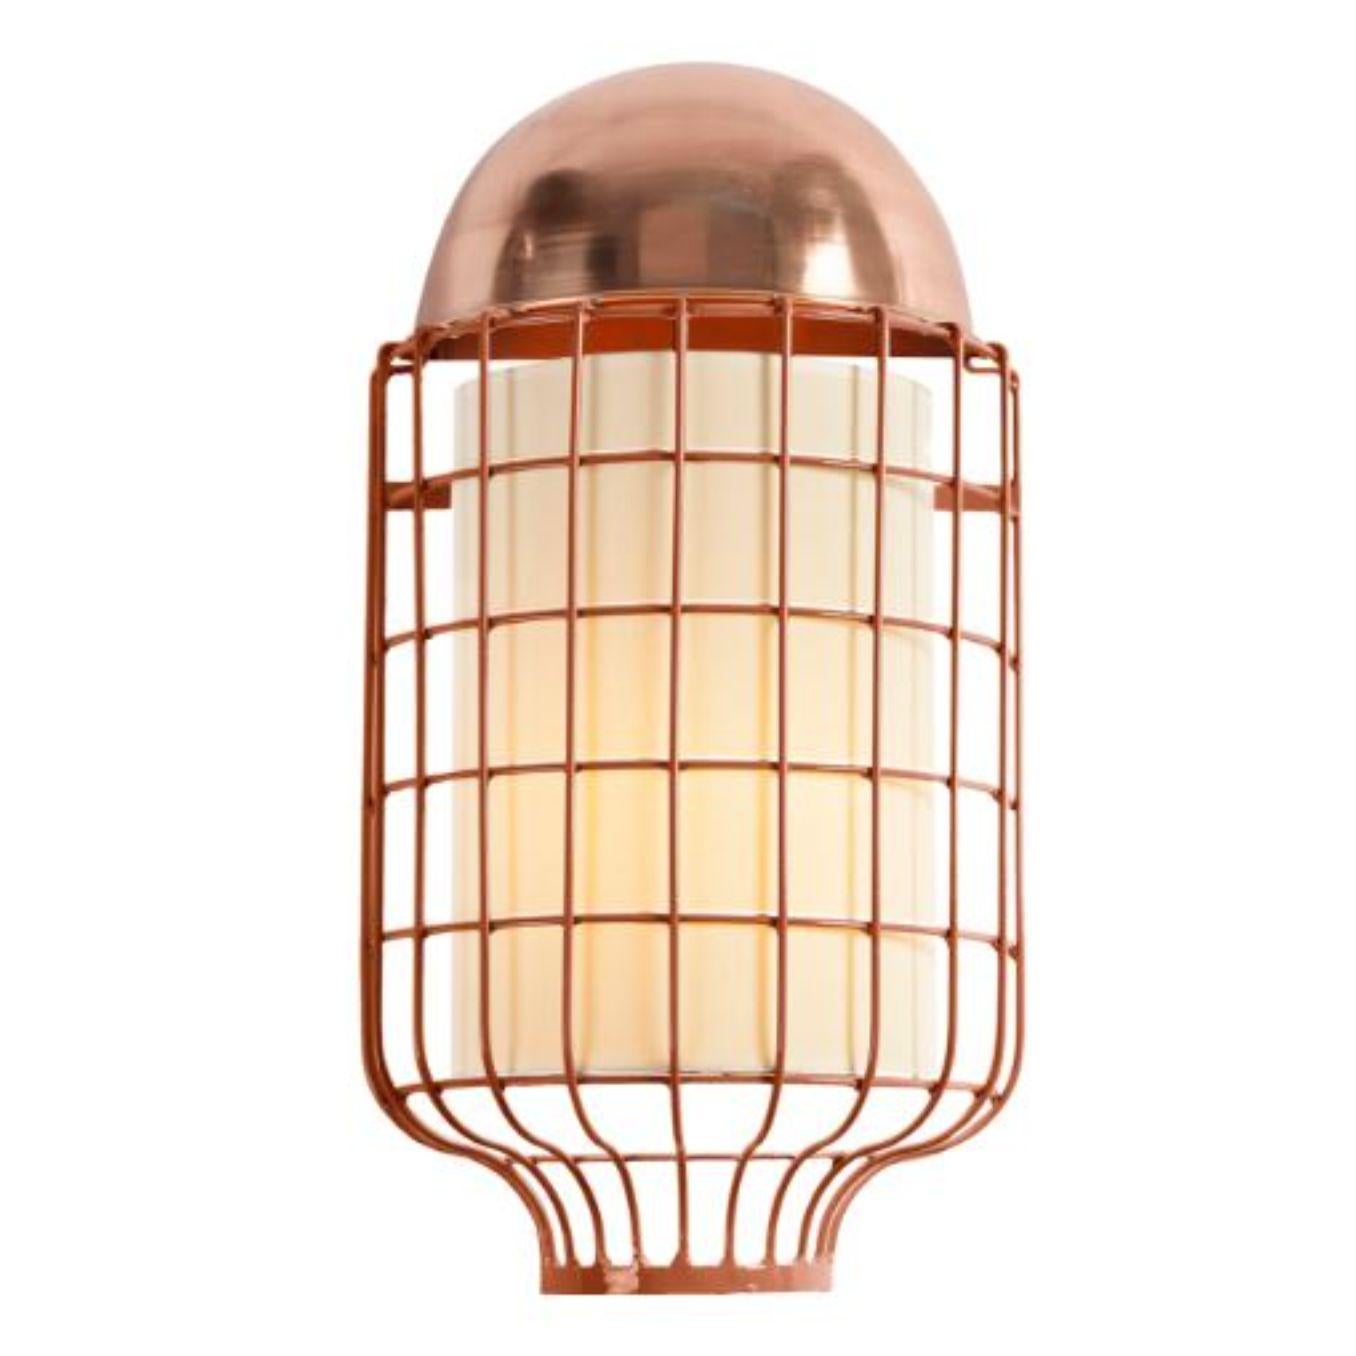 Copper Magnolia wall lamp by Dooq
Dimensions: W 30 x D 13 x H 56 cm
Materials: lacquered metal, polished or brushed metal, copper.
abat-jour: cotton
Also available in different colours and materials.

Information:
230V/50Hz
E14/1x15W